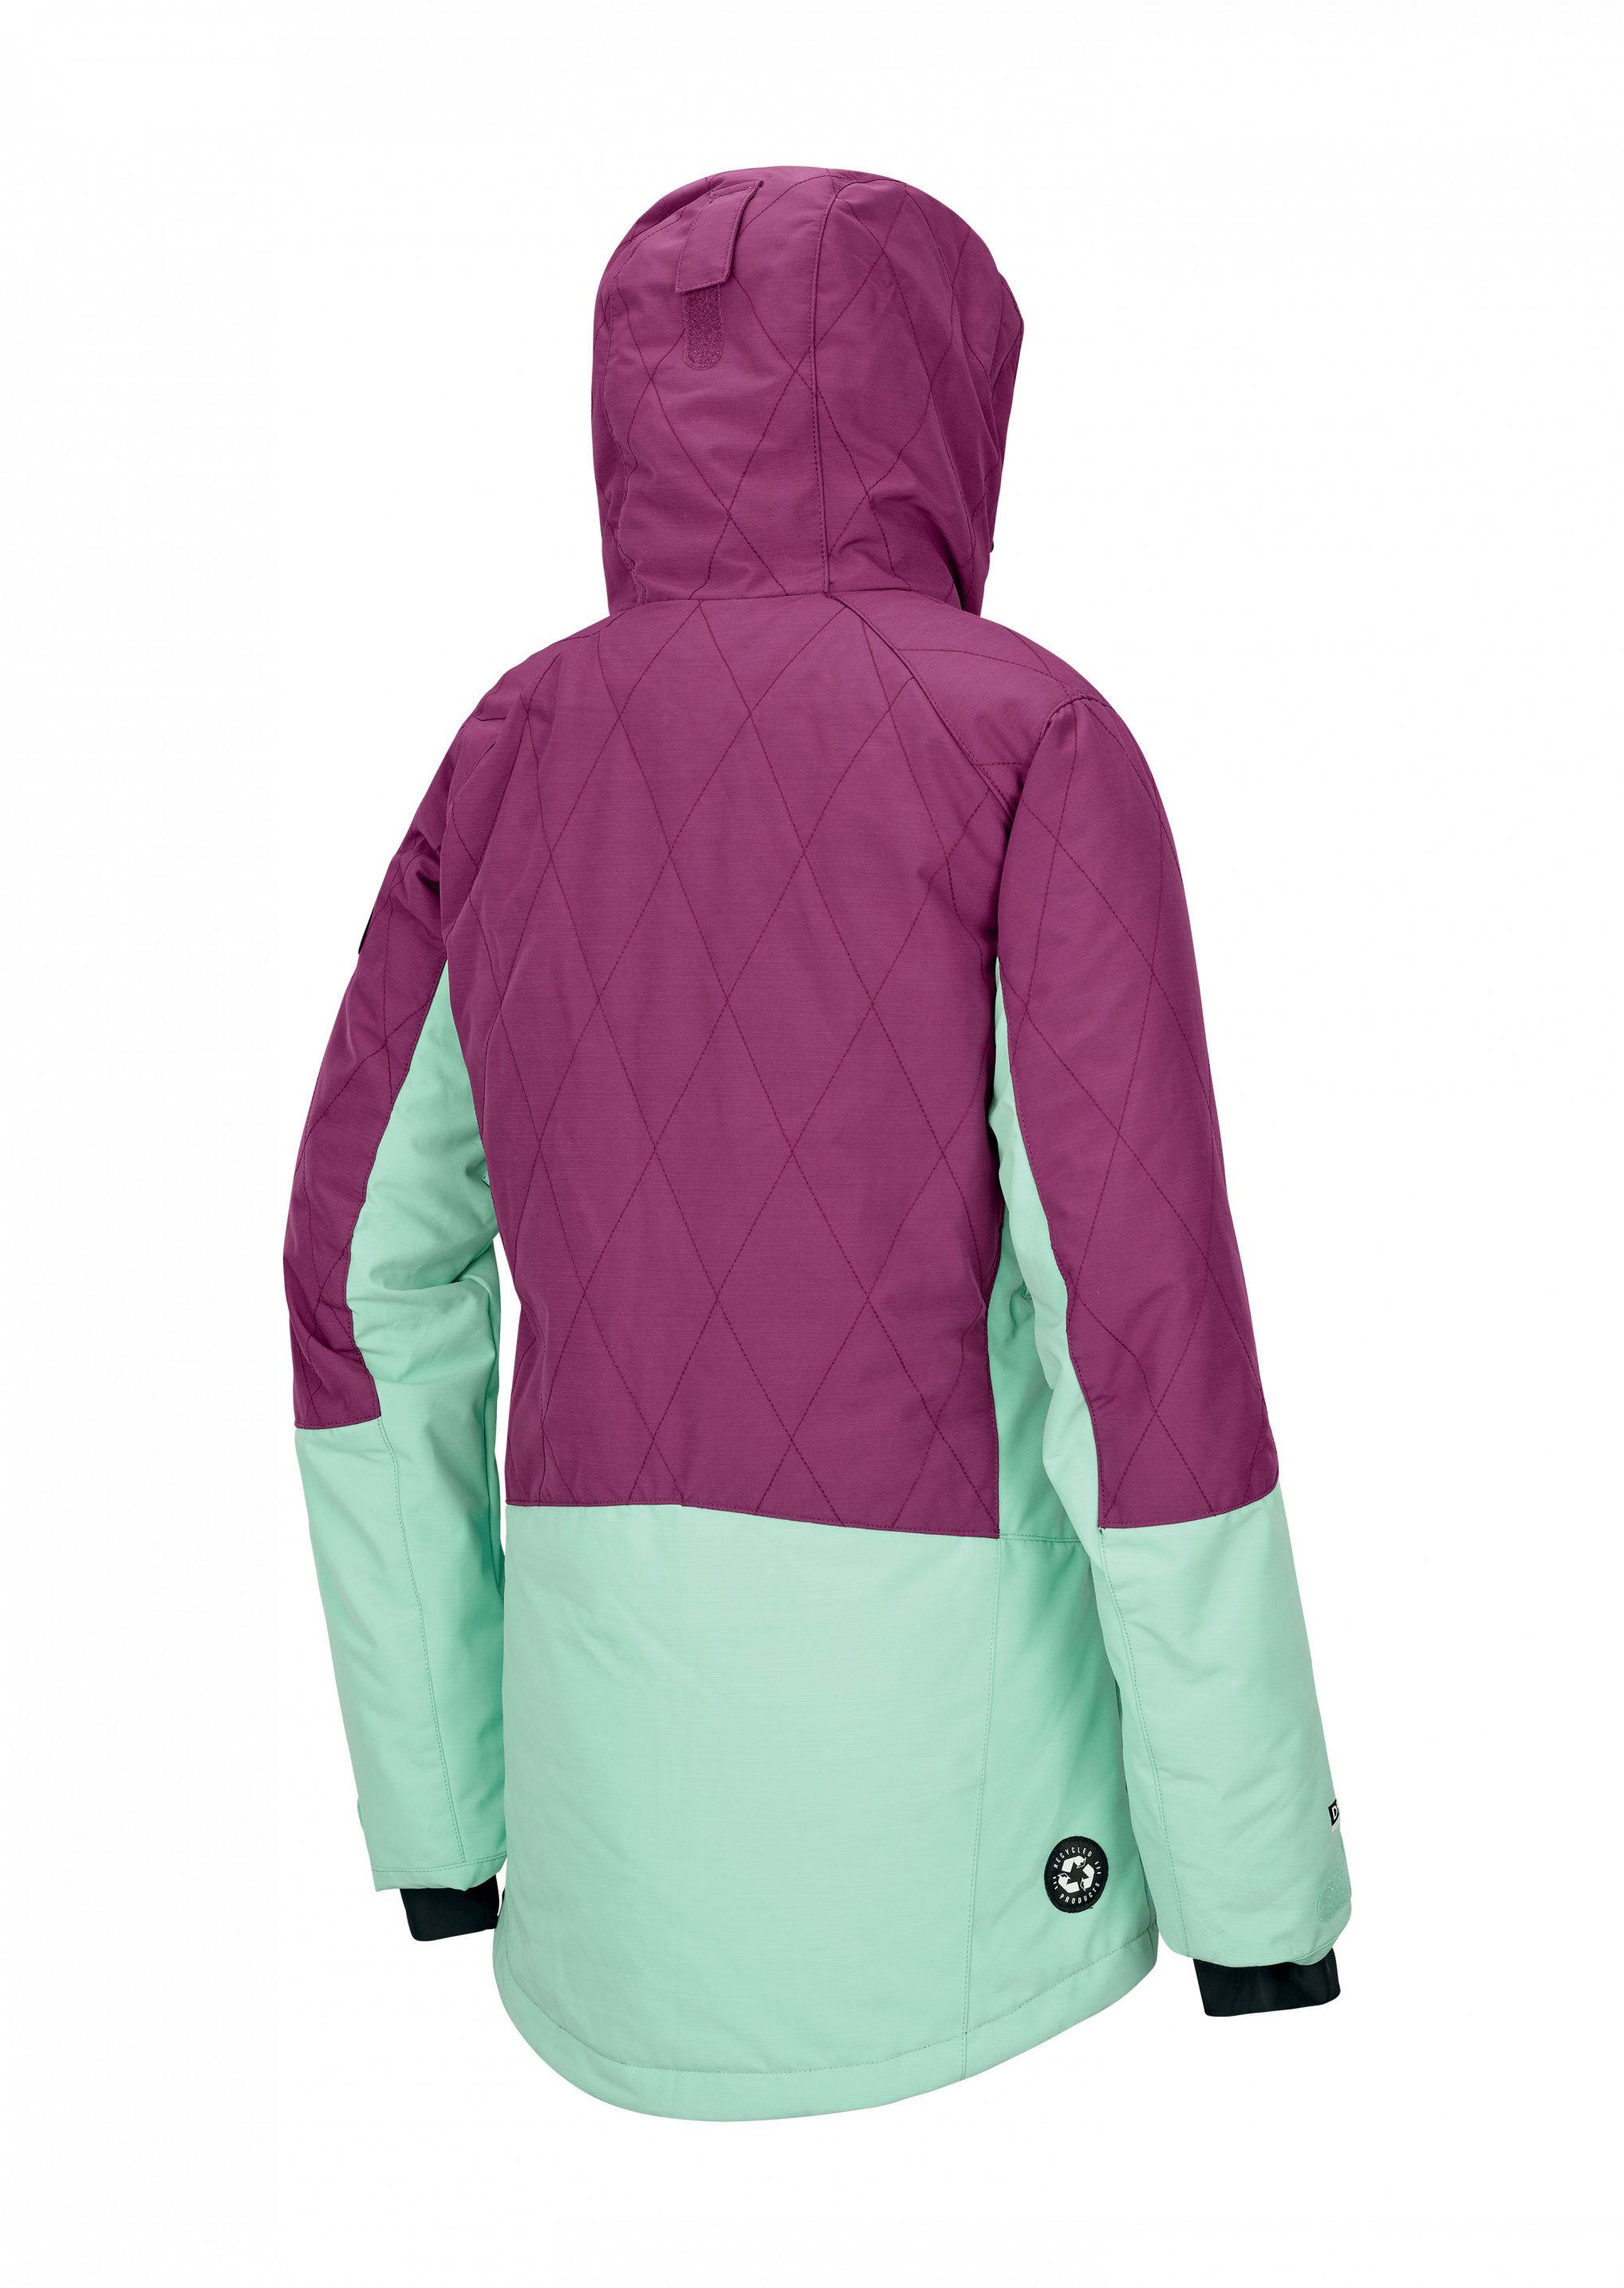 Picture Organic Clothing Mineral Jacket Women’s Raspberry XS